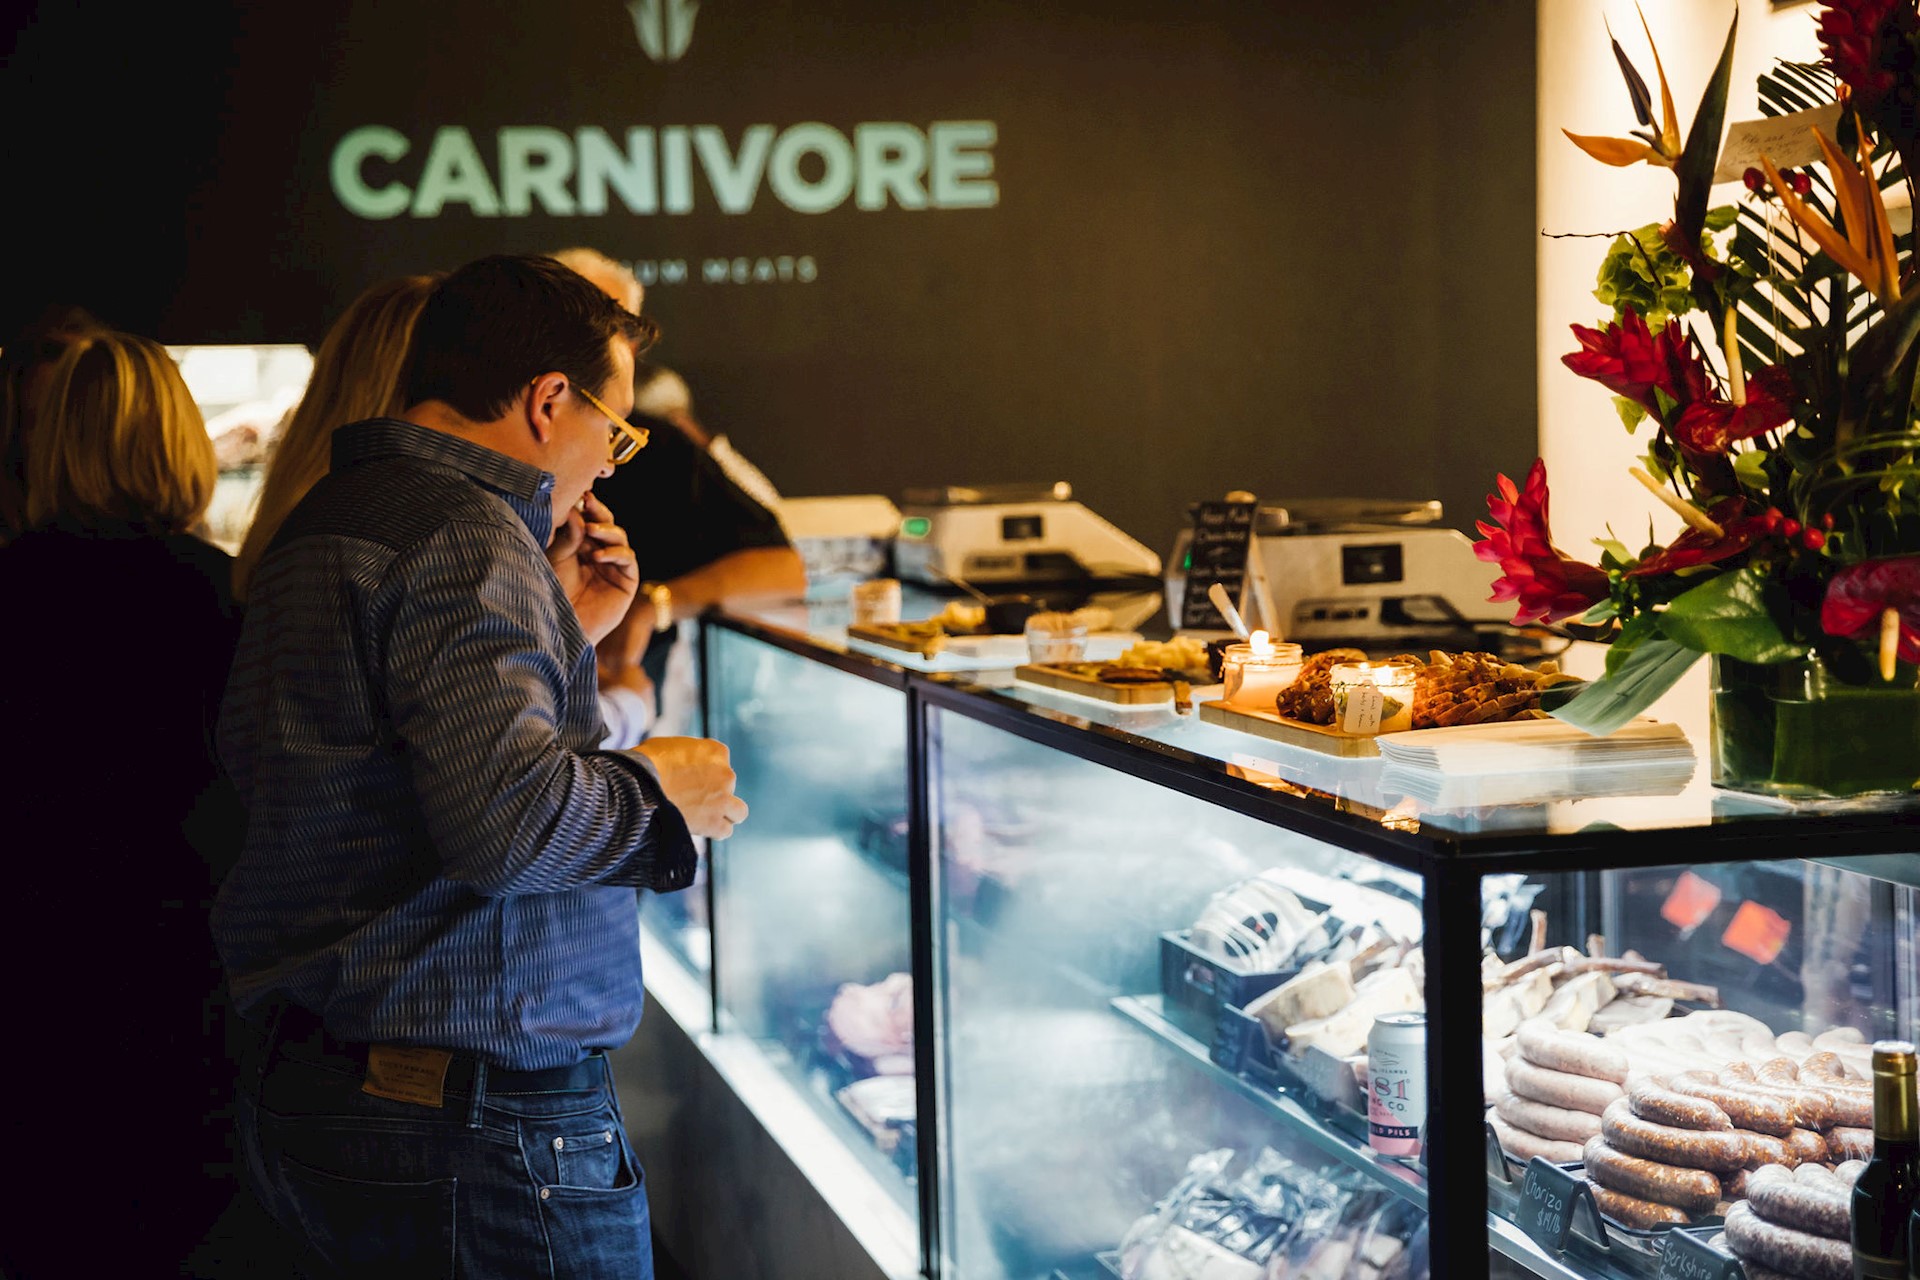 Meet the owner: The meat of the Carnivore story